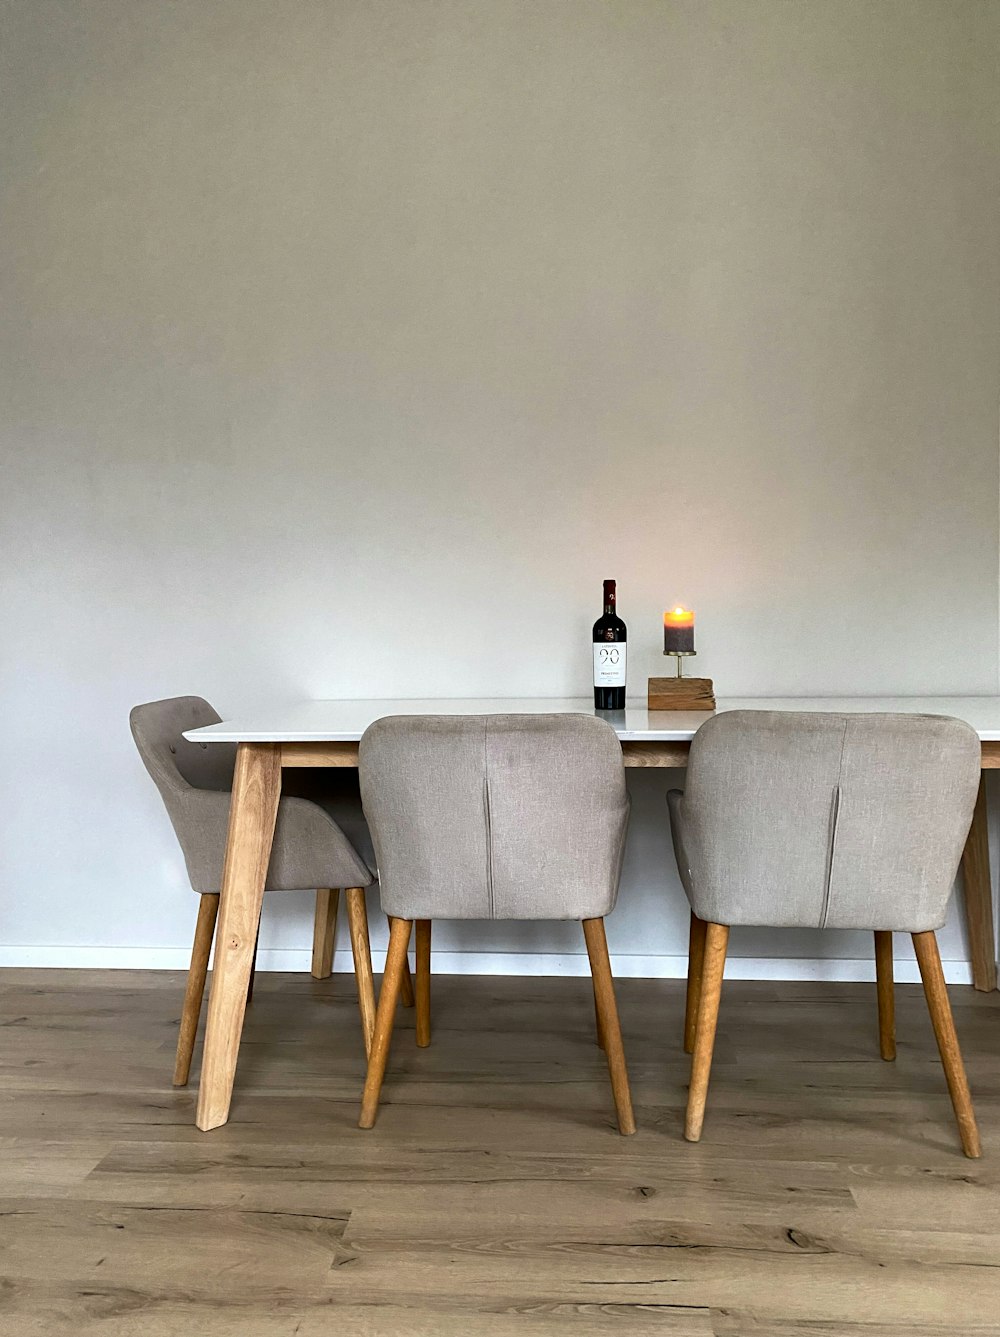 a table with chairs and a bottle of wine on it